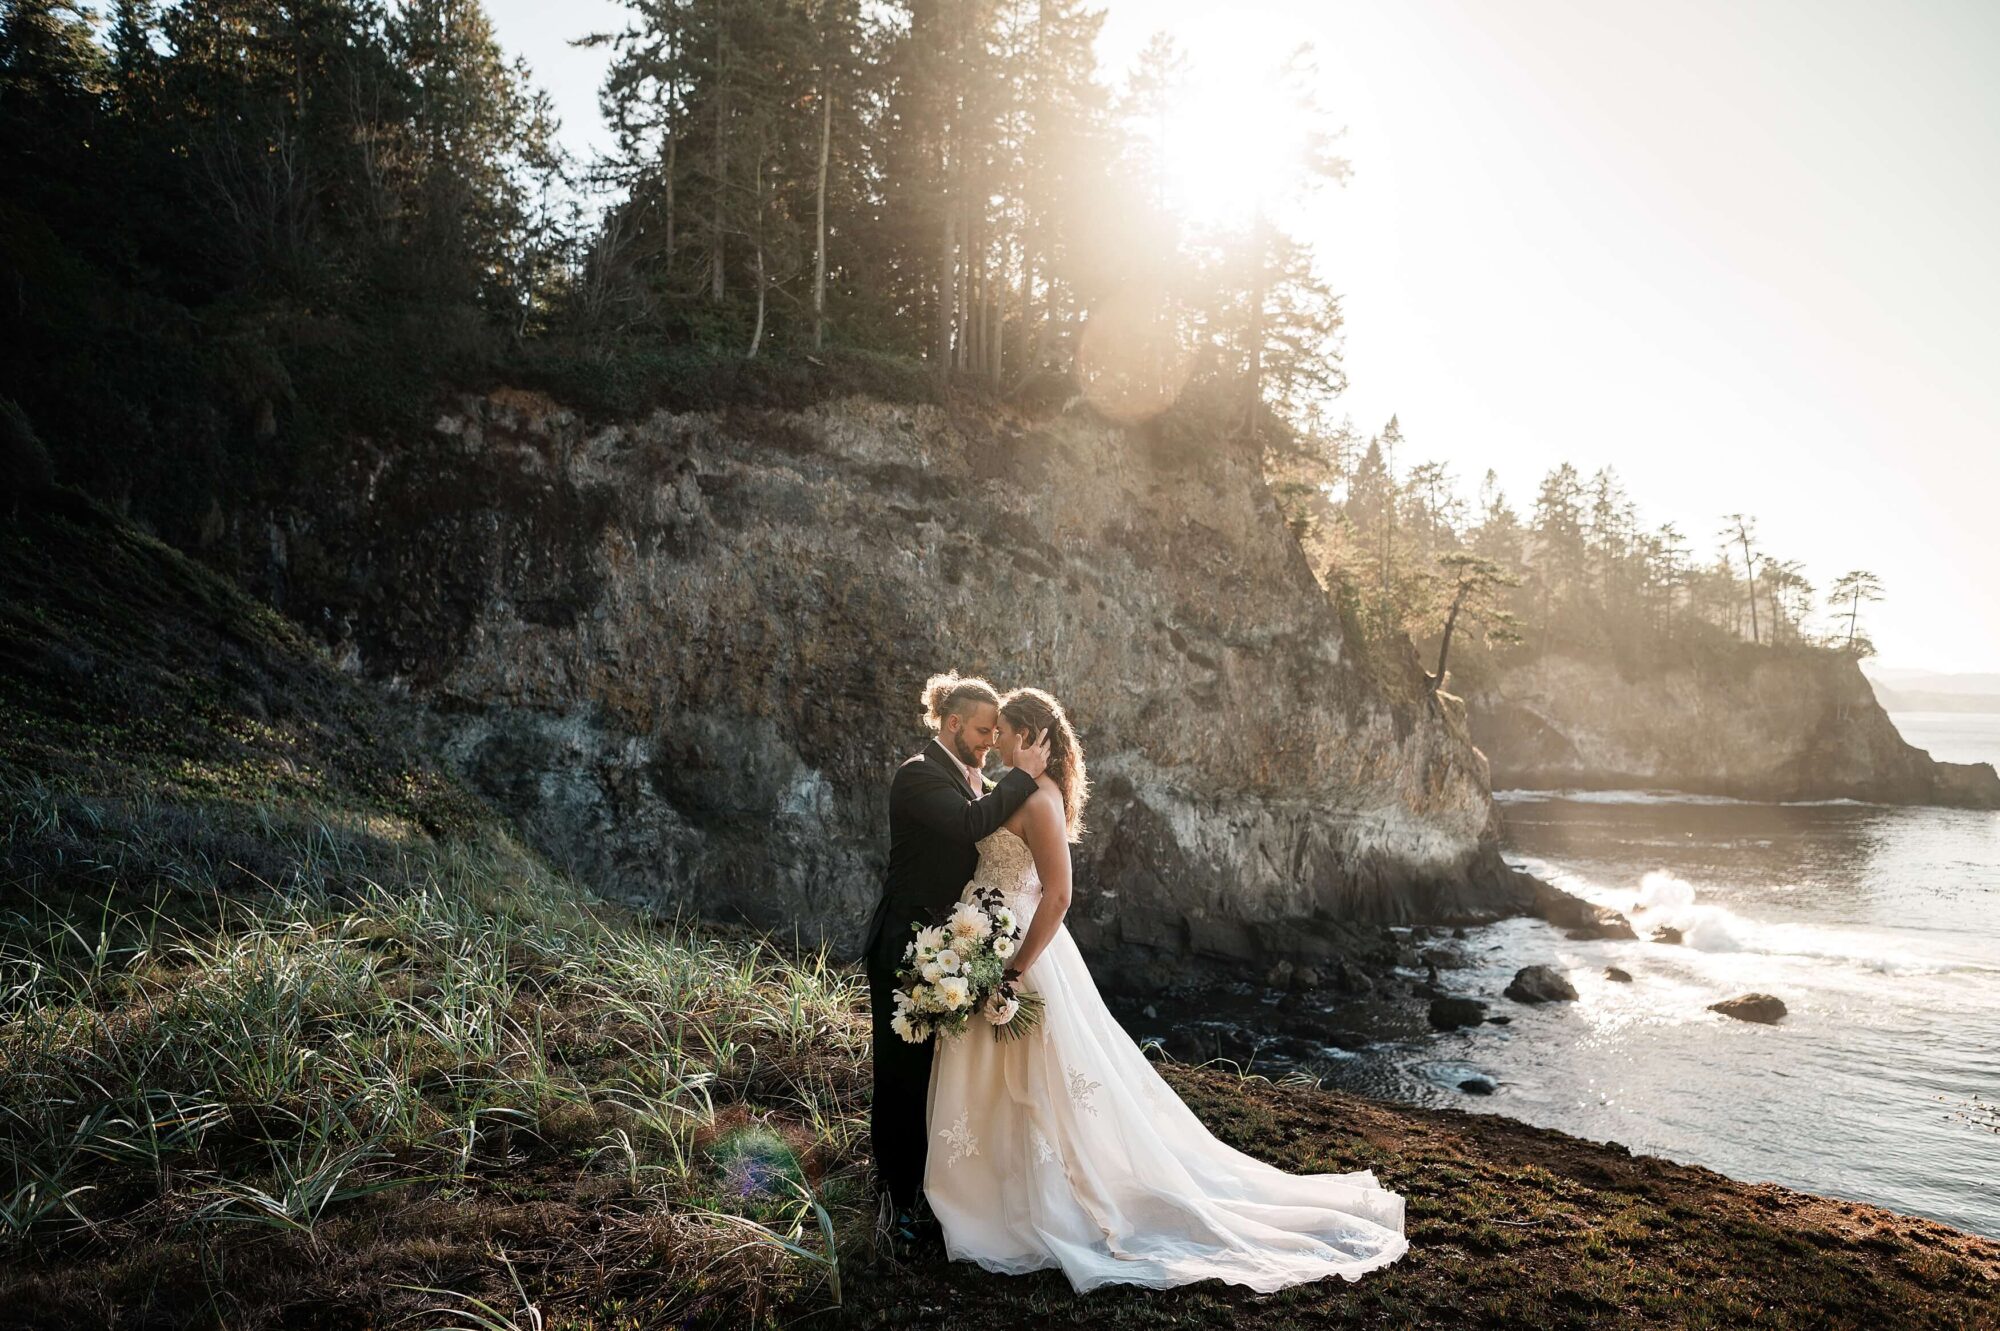 Bride and groom eloping at sunset on the Olympic Peninsula